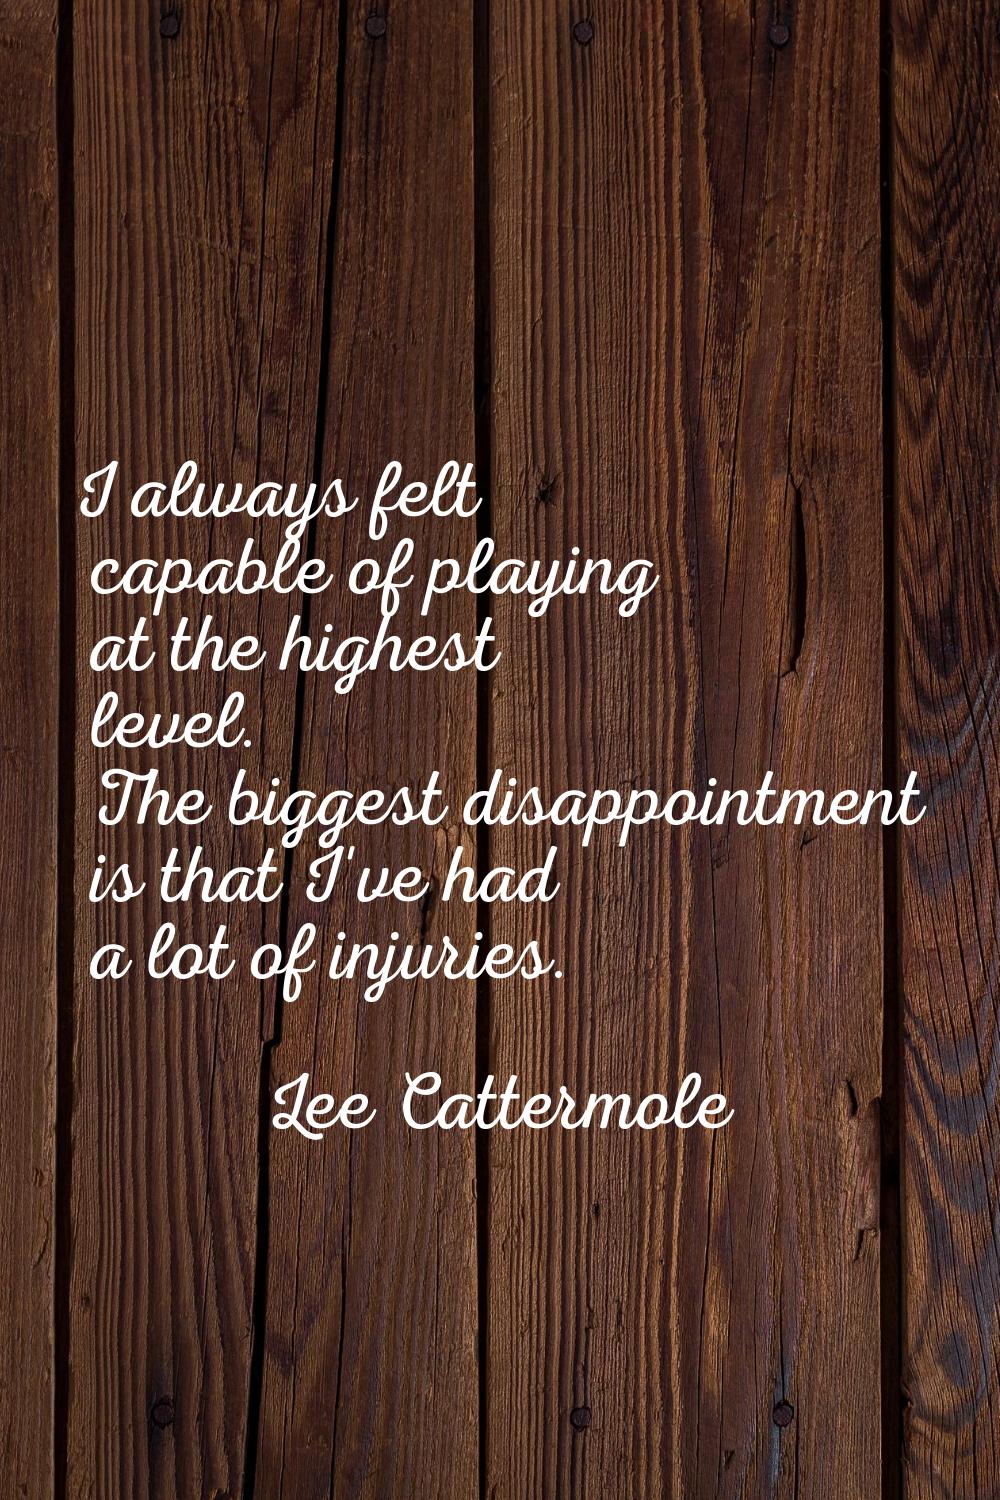 I always felt capable of playing at the highest level. The biggest disappointment is that I've had 